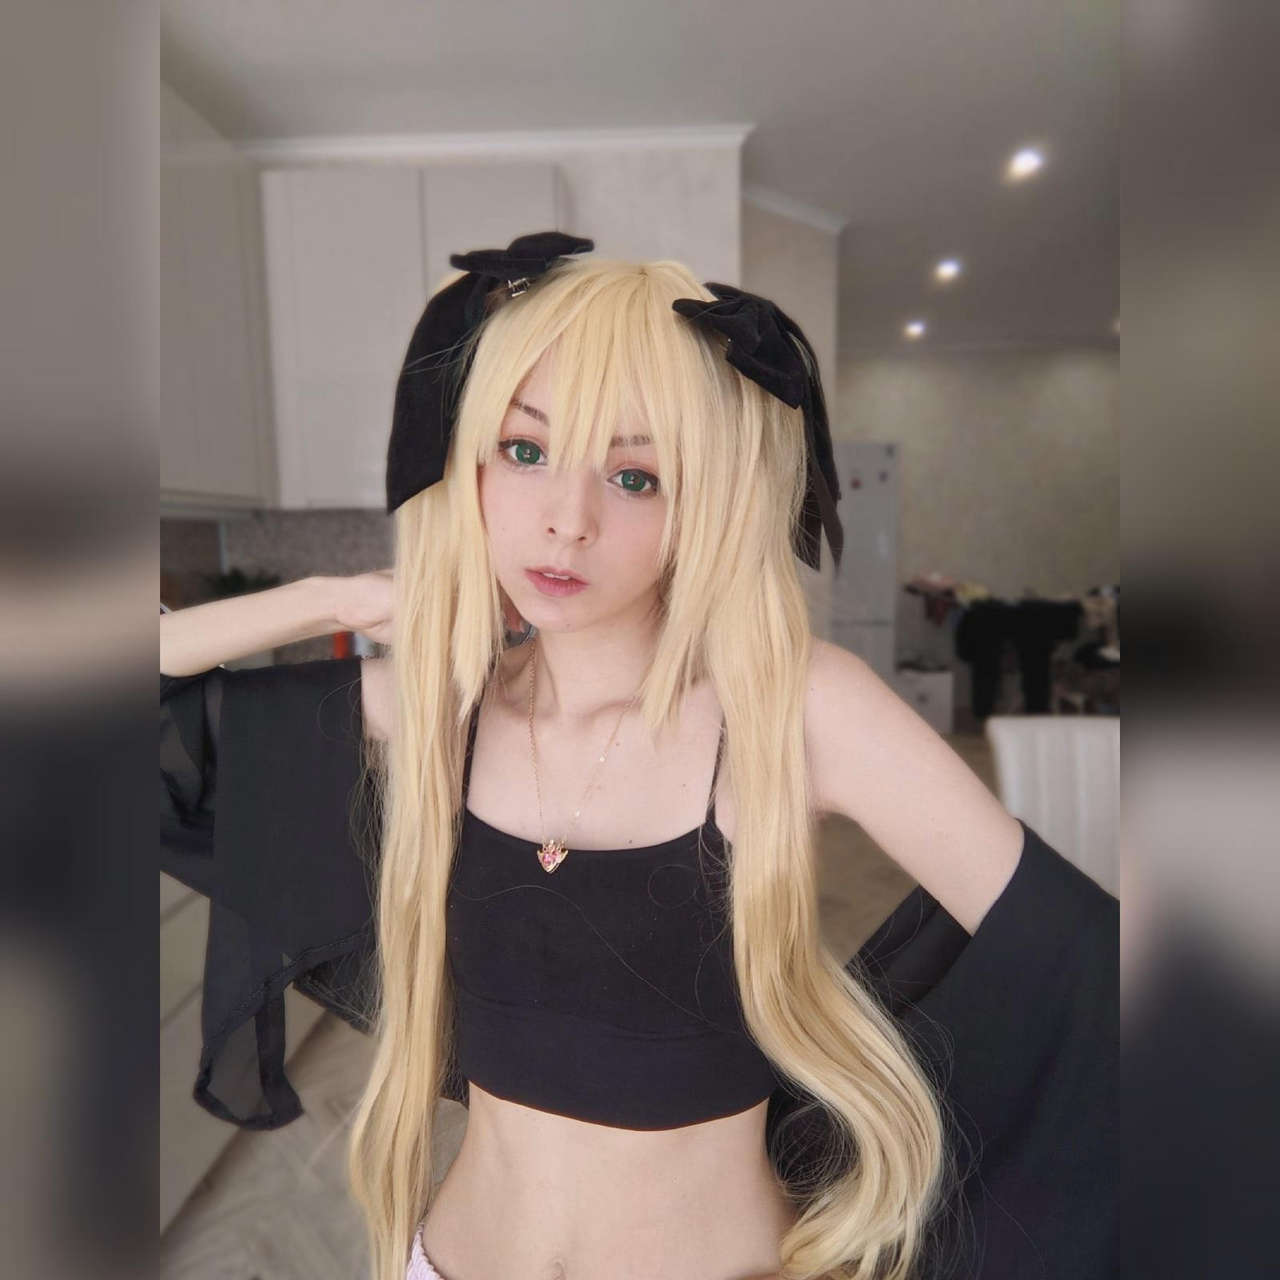 Made An Original Cosplay Of The Typical Tsundere In My Opinio